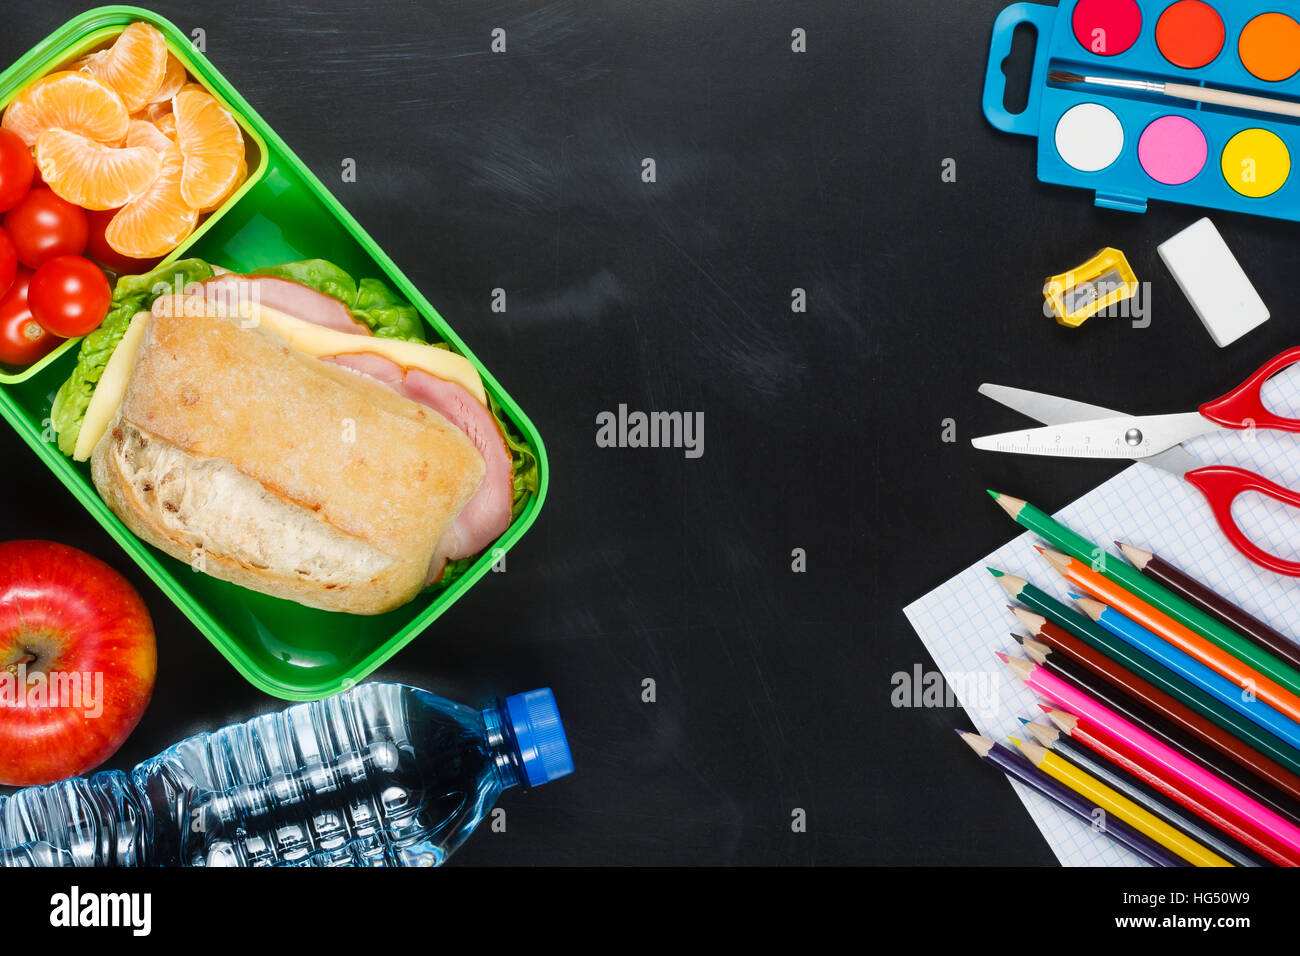 School lunch. Sandwich, small tomatoes, tangerine, apple in plastic lunch box and bottle of water on black chalkboard. Stock Photo